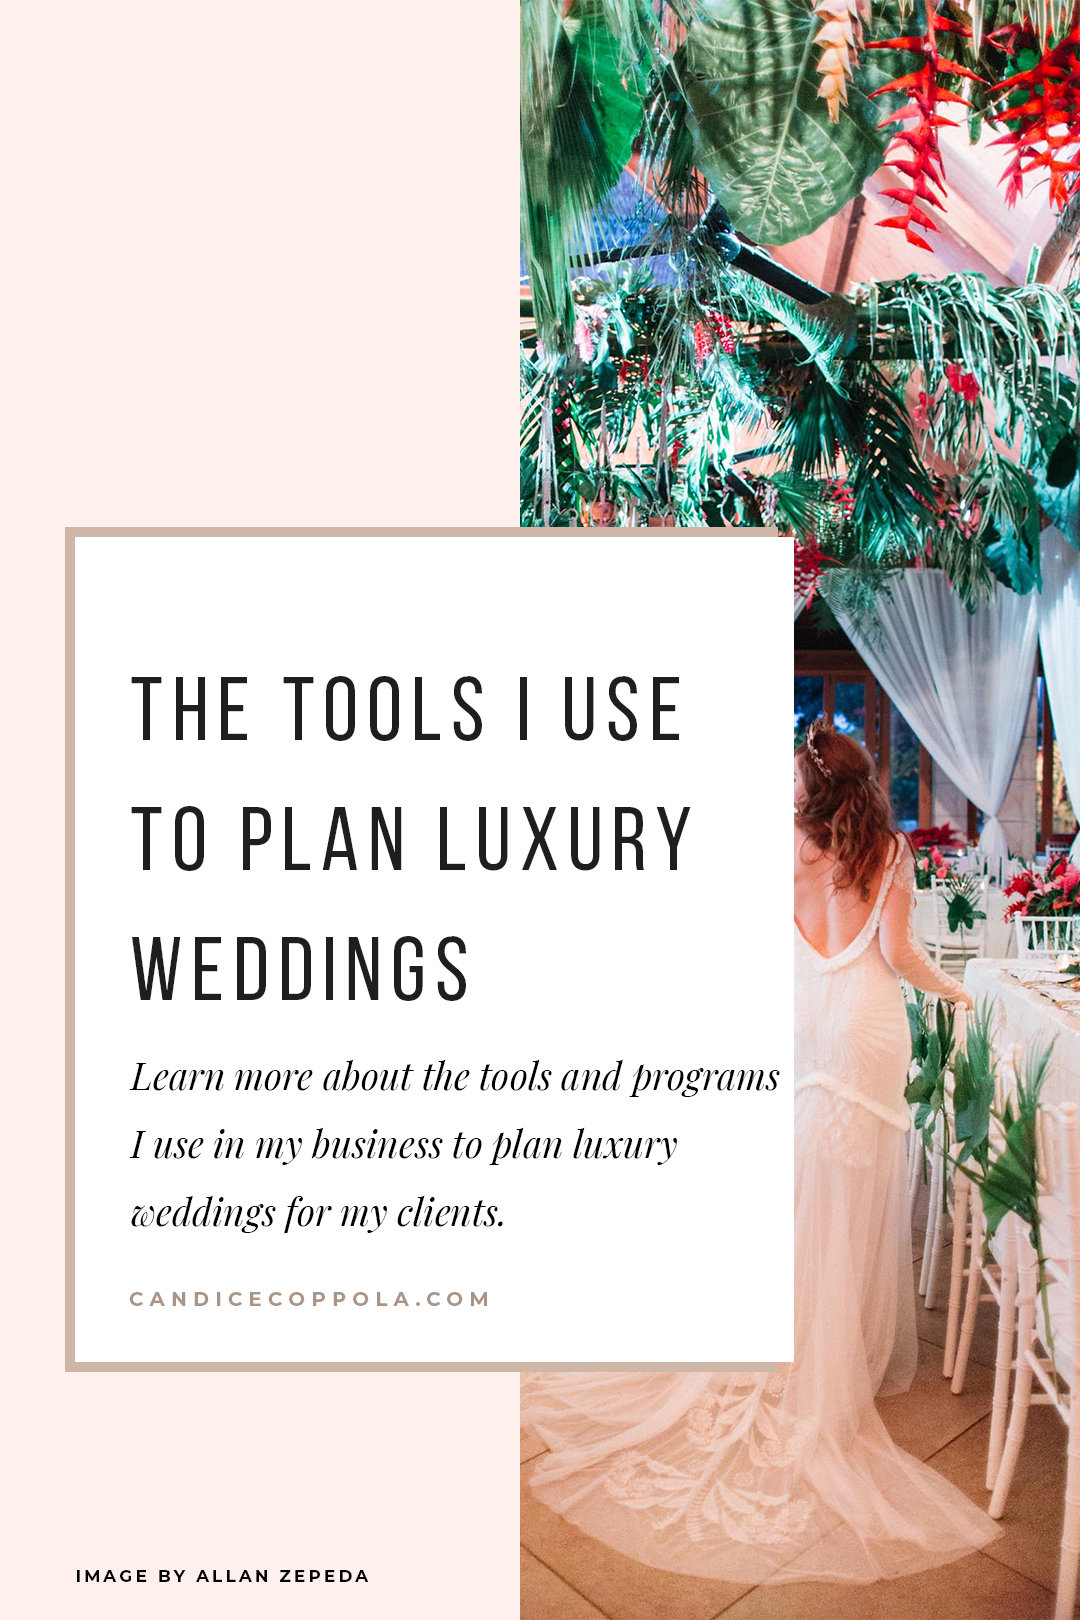 Are you searching for the right tools to run your wedding planning business? Learn more about the tools I used to plan luxury weddings for my clients, and receive special discounts and freebies! #weddingplannerbiz #businesstools